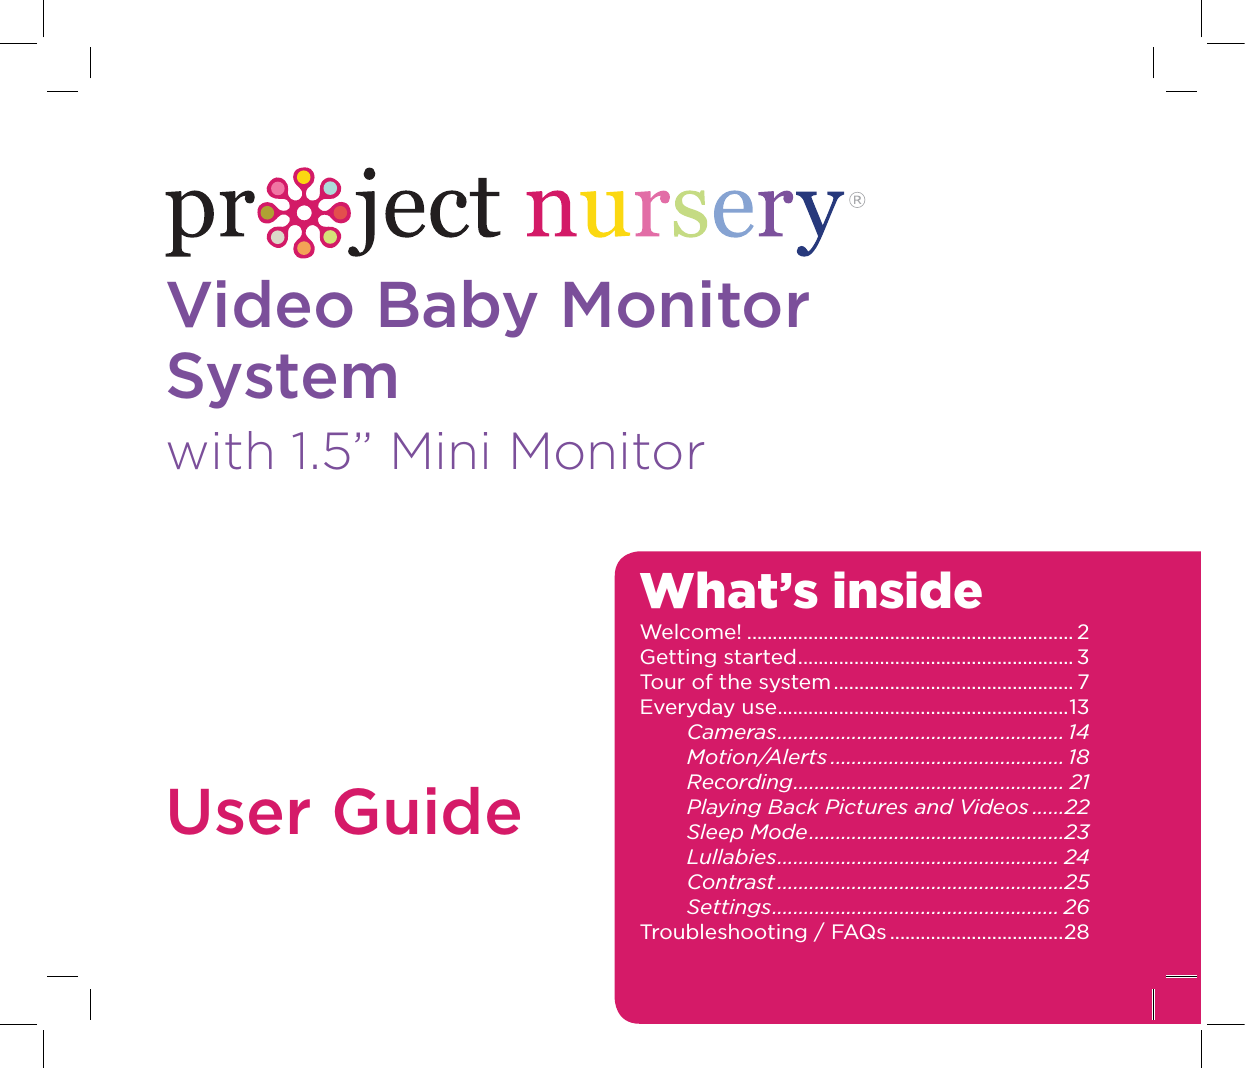 Video Baby Monitor Systemwith 1.5” Mini MonitorUser GuideWhat’s insideWelcome! ................................................................ 2Getting started ...................................................... 3Tour of the system ............................................... 7Everyday use .........................................................13Cameras ...................................................... 14Motion/Alerts ............................................ 18Recording ................................................... 21Playing Back Pictures and Videos ......22Sleep Mode ................................................23Lullabies ..................................................... 24Contrast ......................................................25Settings ...................................................... 26Troubleshooting / FAQs ..................................28